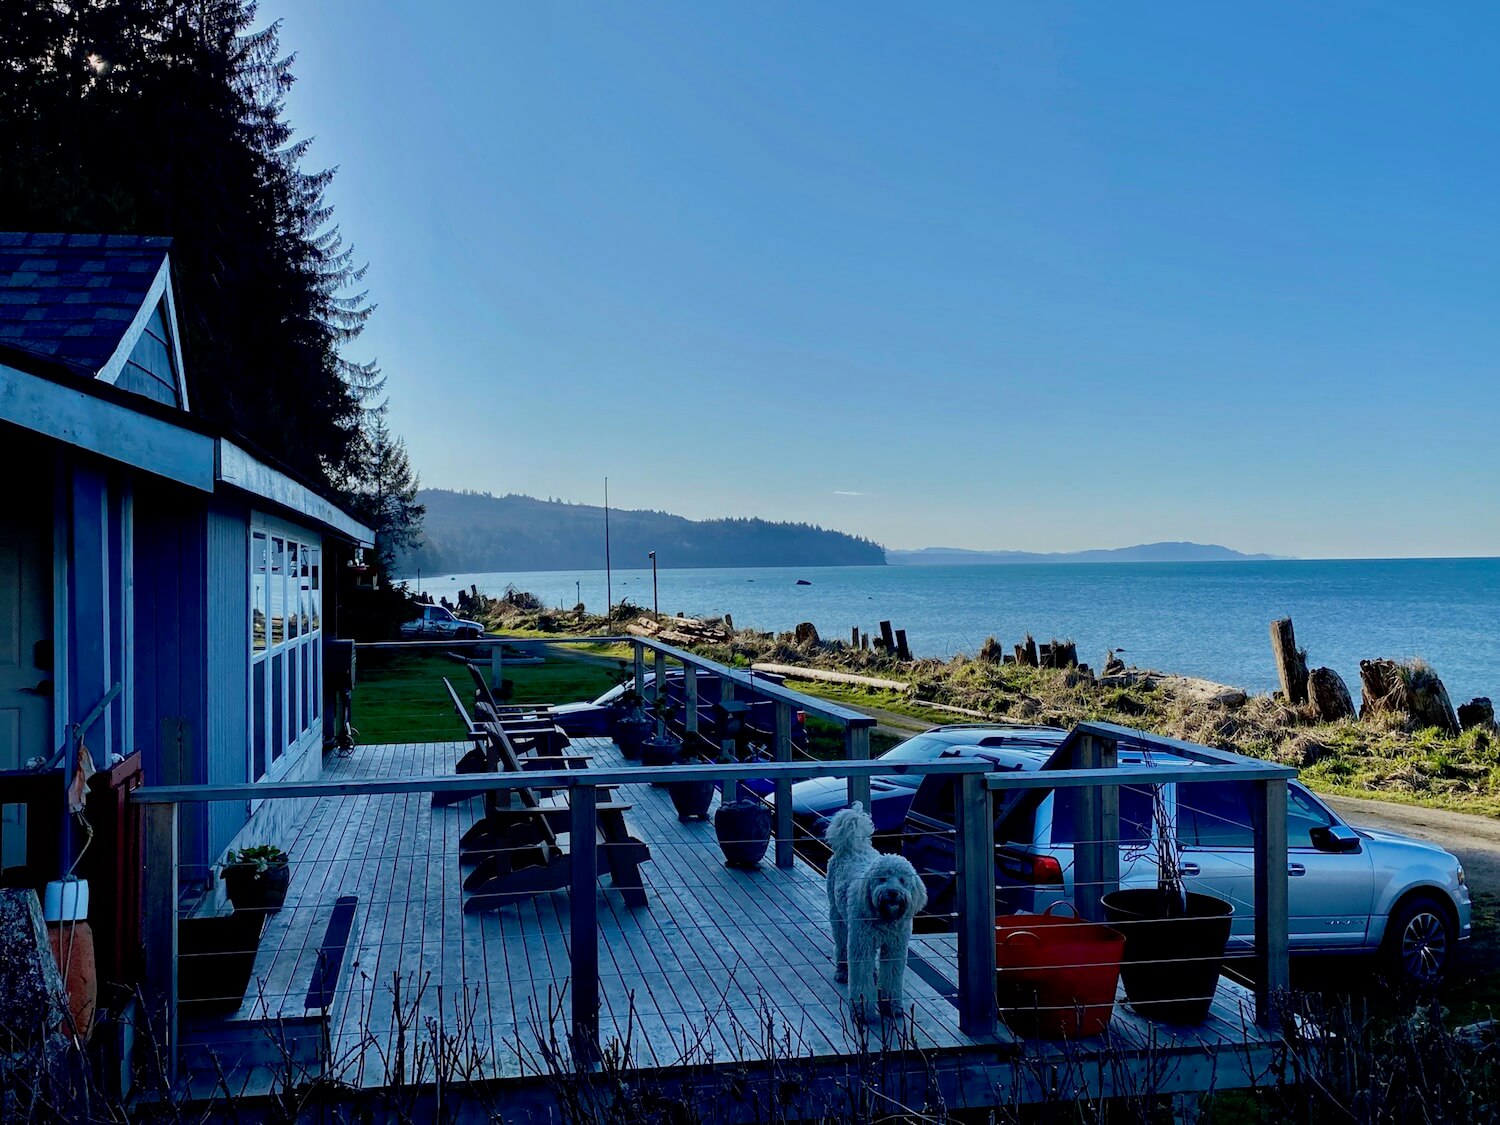 A cabin located near Joyce Washington on the Olympic Peninsula looking toward the Straight of Juan de Fuca. In the foreground is a beach cabin with deck and a trimmed poodle with some cars in the driveway. The water is blue and the water scape is vast with some peninsulas of land jutting out into the strait.